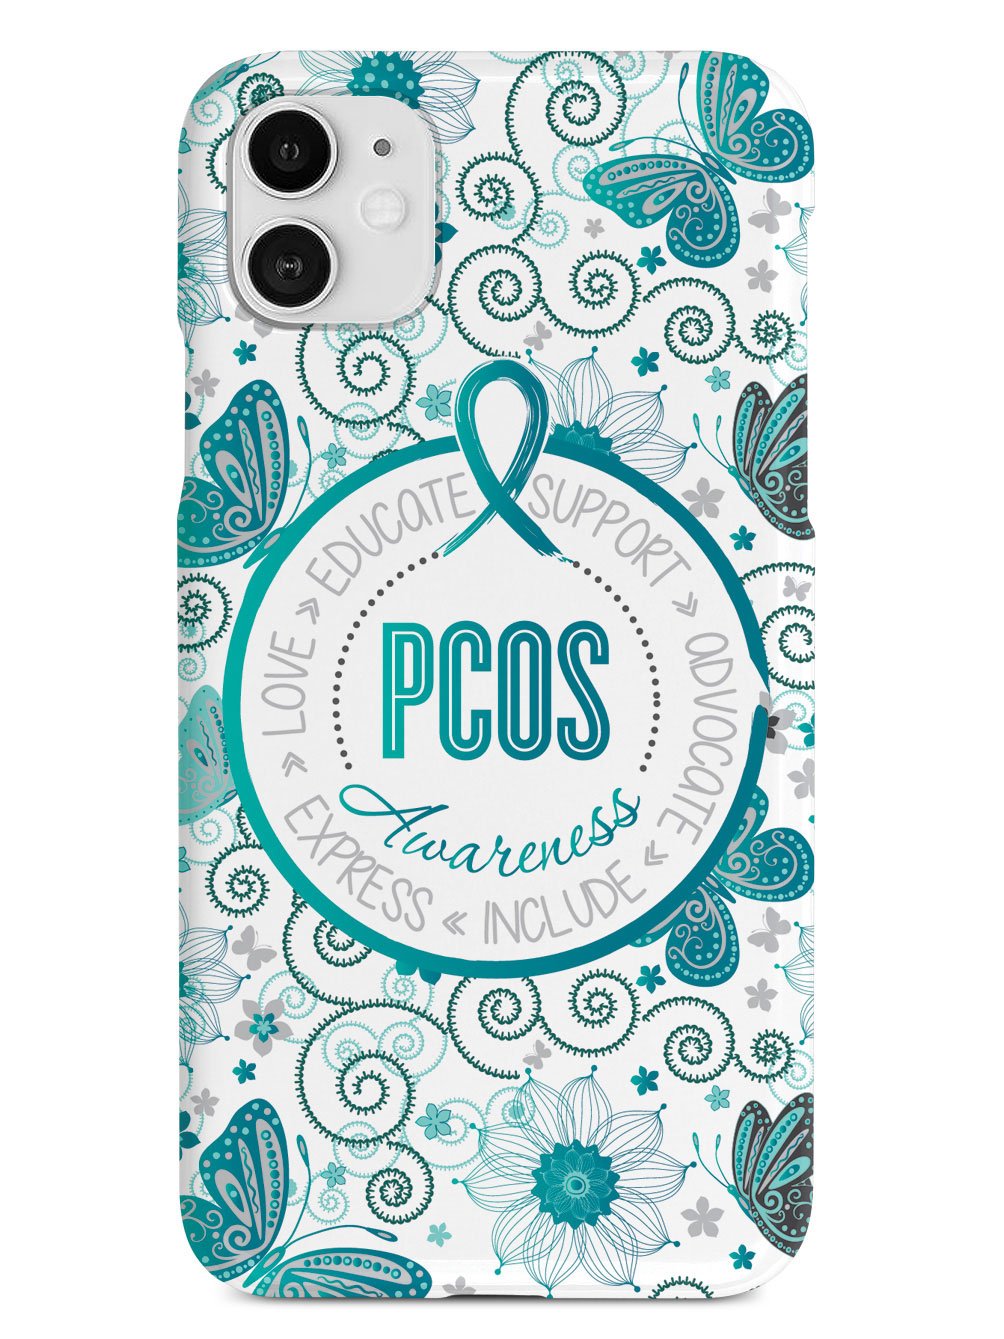 PCOS Awareness - Butterfly Pattern Case